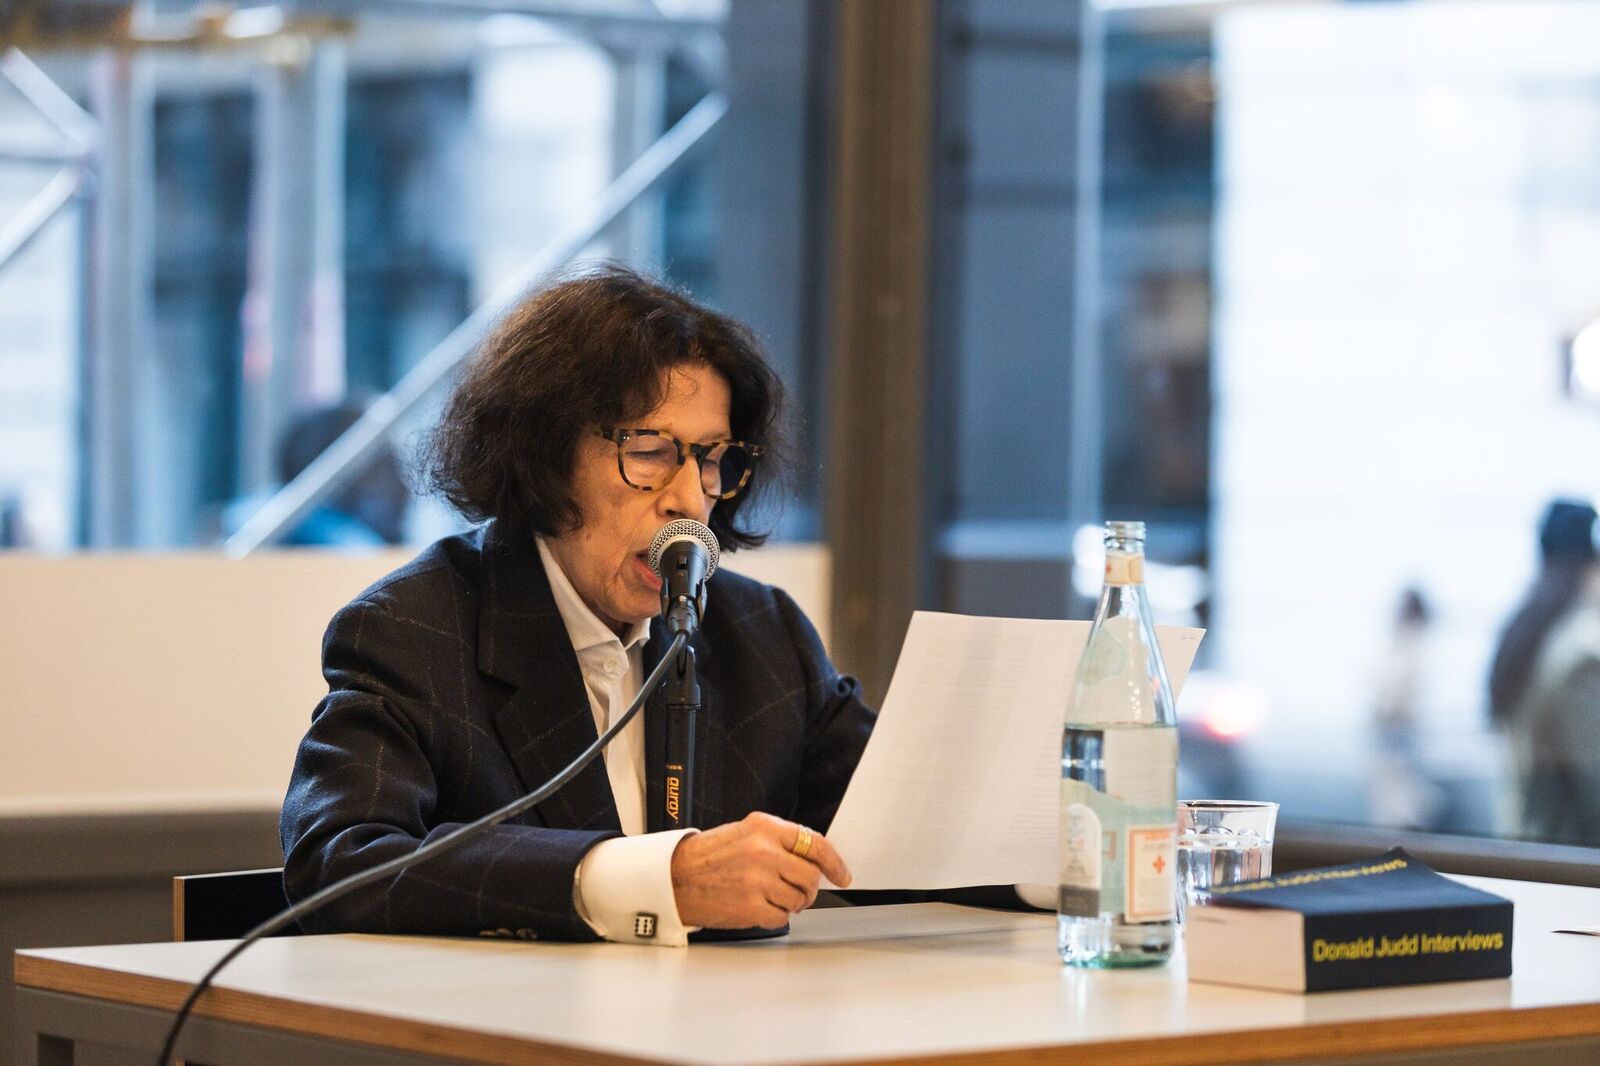 Fran Lebowitz at the Judd Foundation.